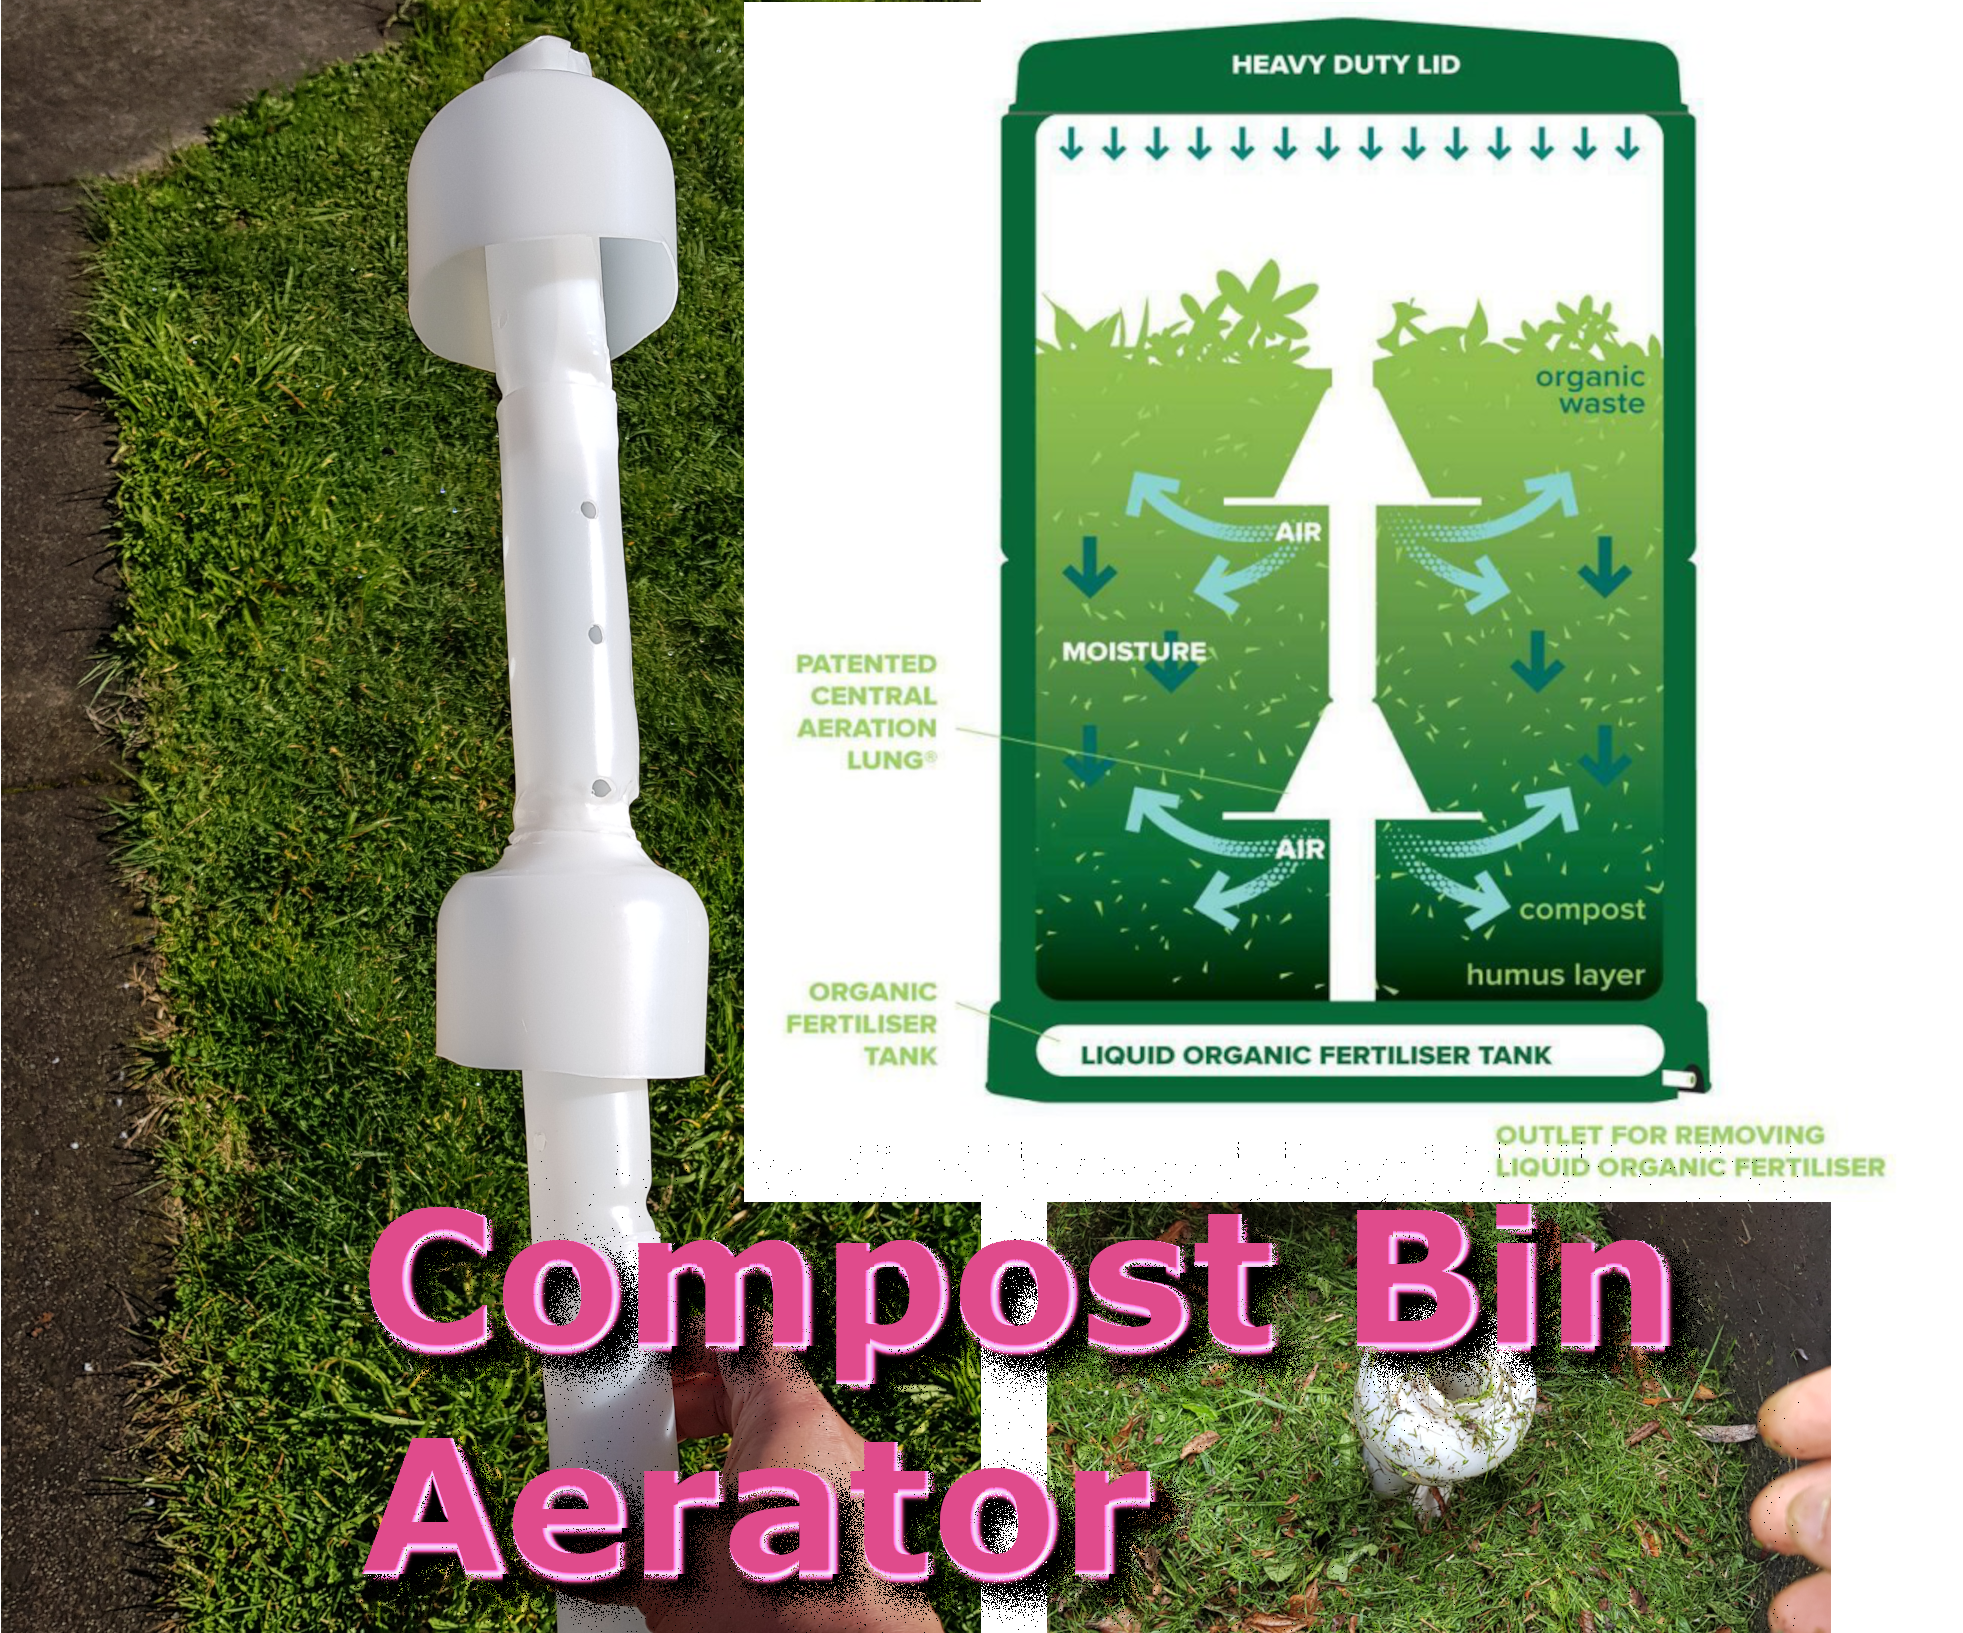 Self-Airing Compost Aerator Lung